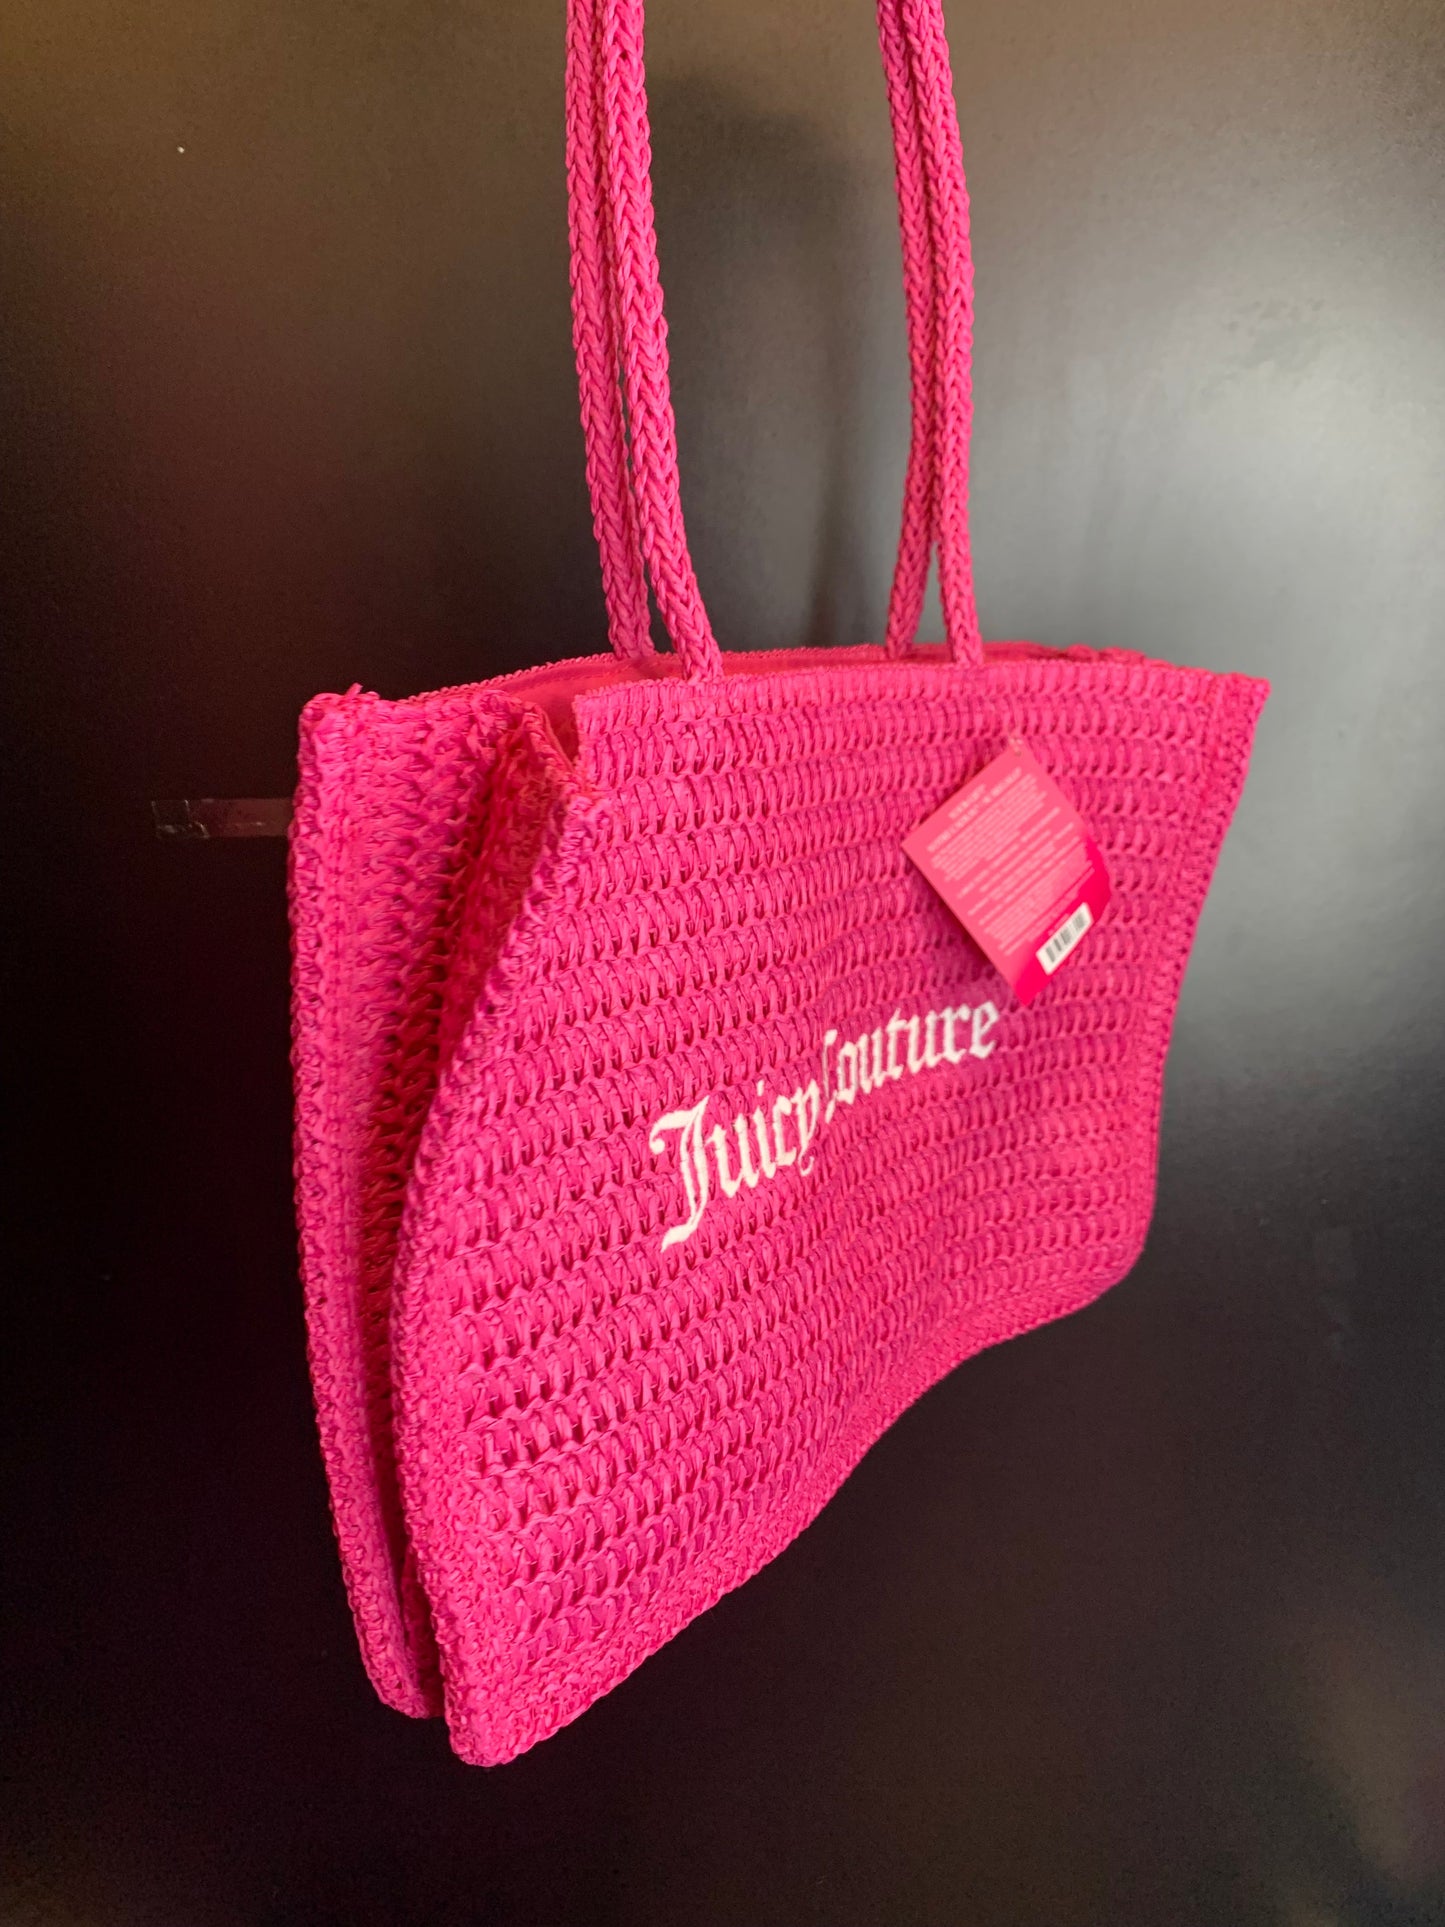 Tote By Juicy Couture  Size: Medium